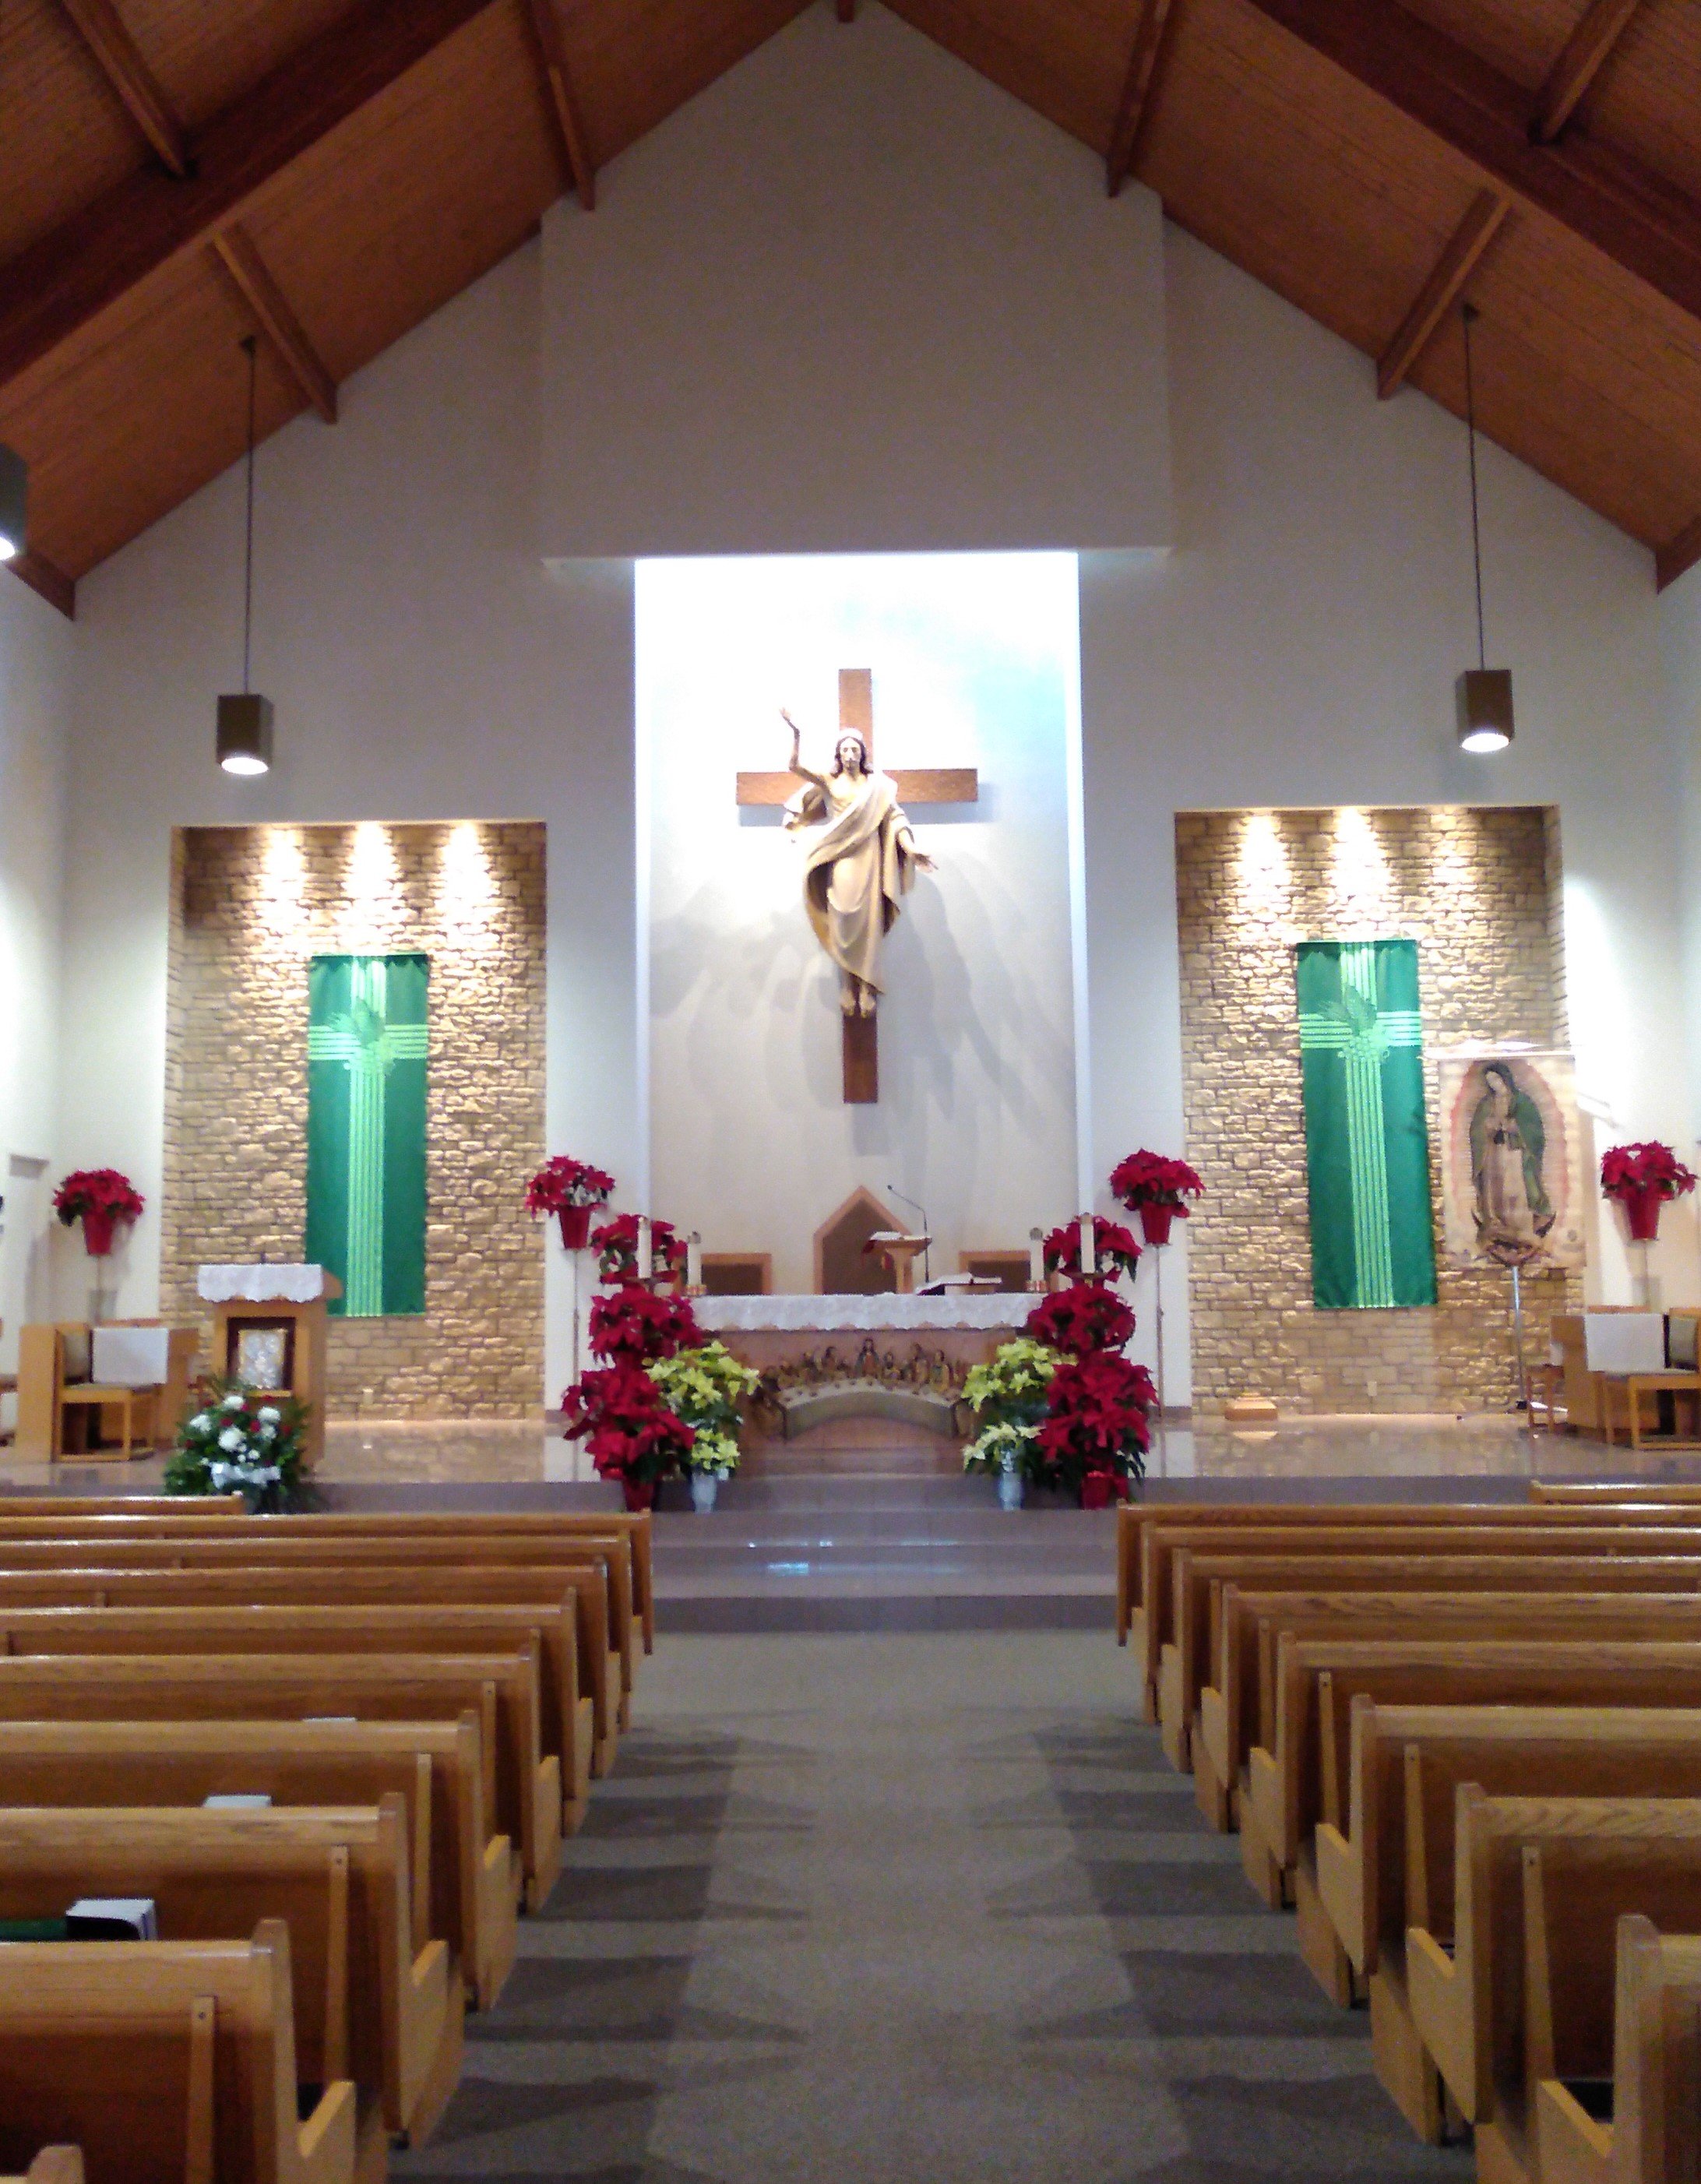 St. Leonard's church looking toward the altar at the Risen Christ and green banners on each side